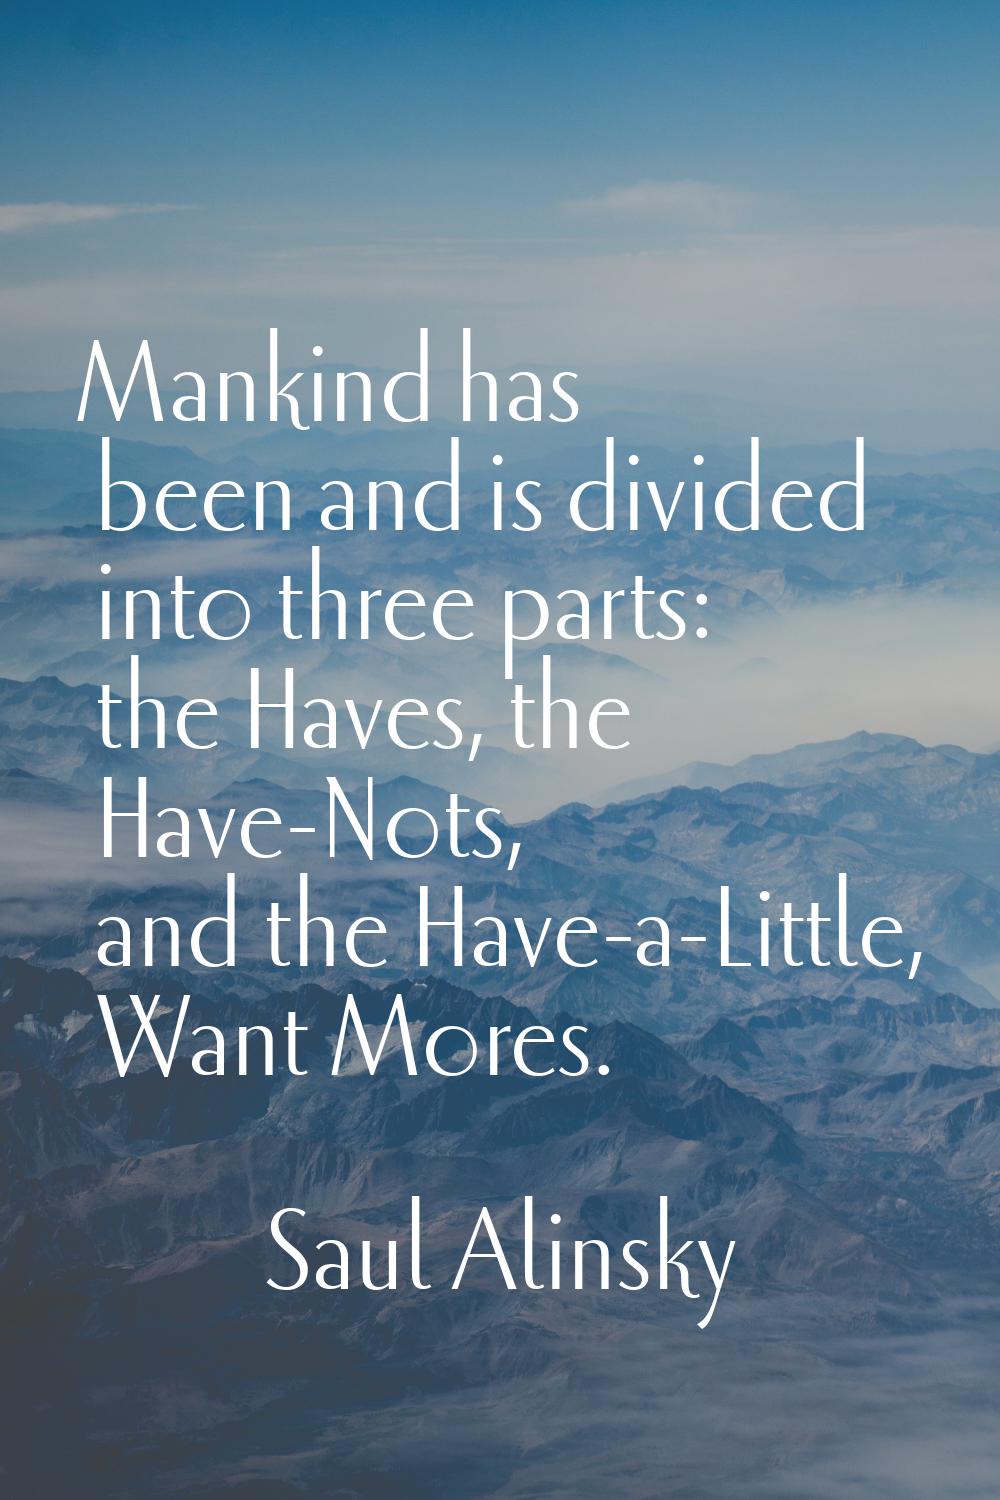 Mankind has been and is divided into three parts: the Haves, the Have-Nots, and the Have-a-Little, 